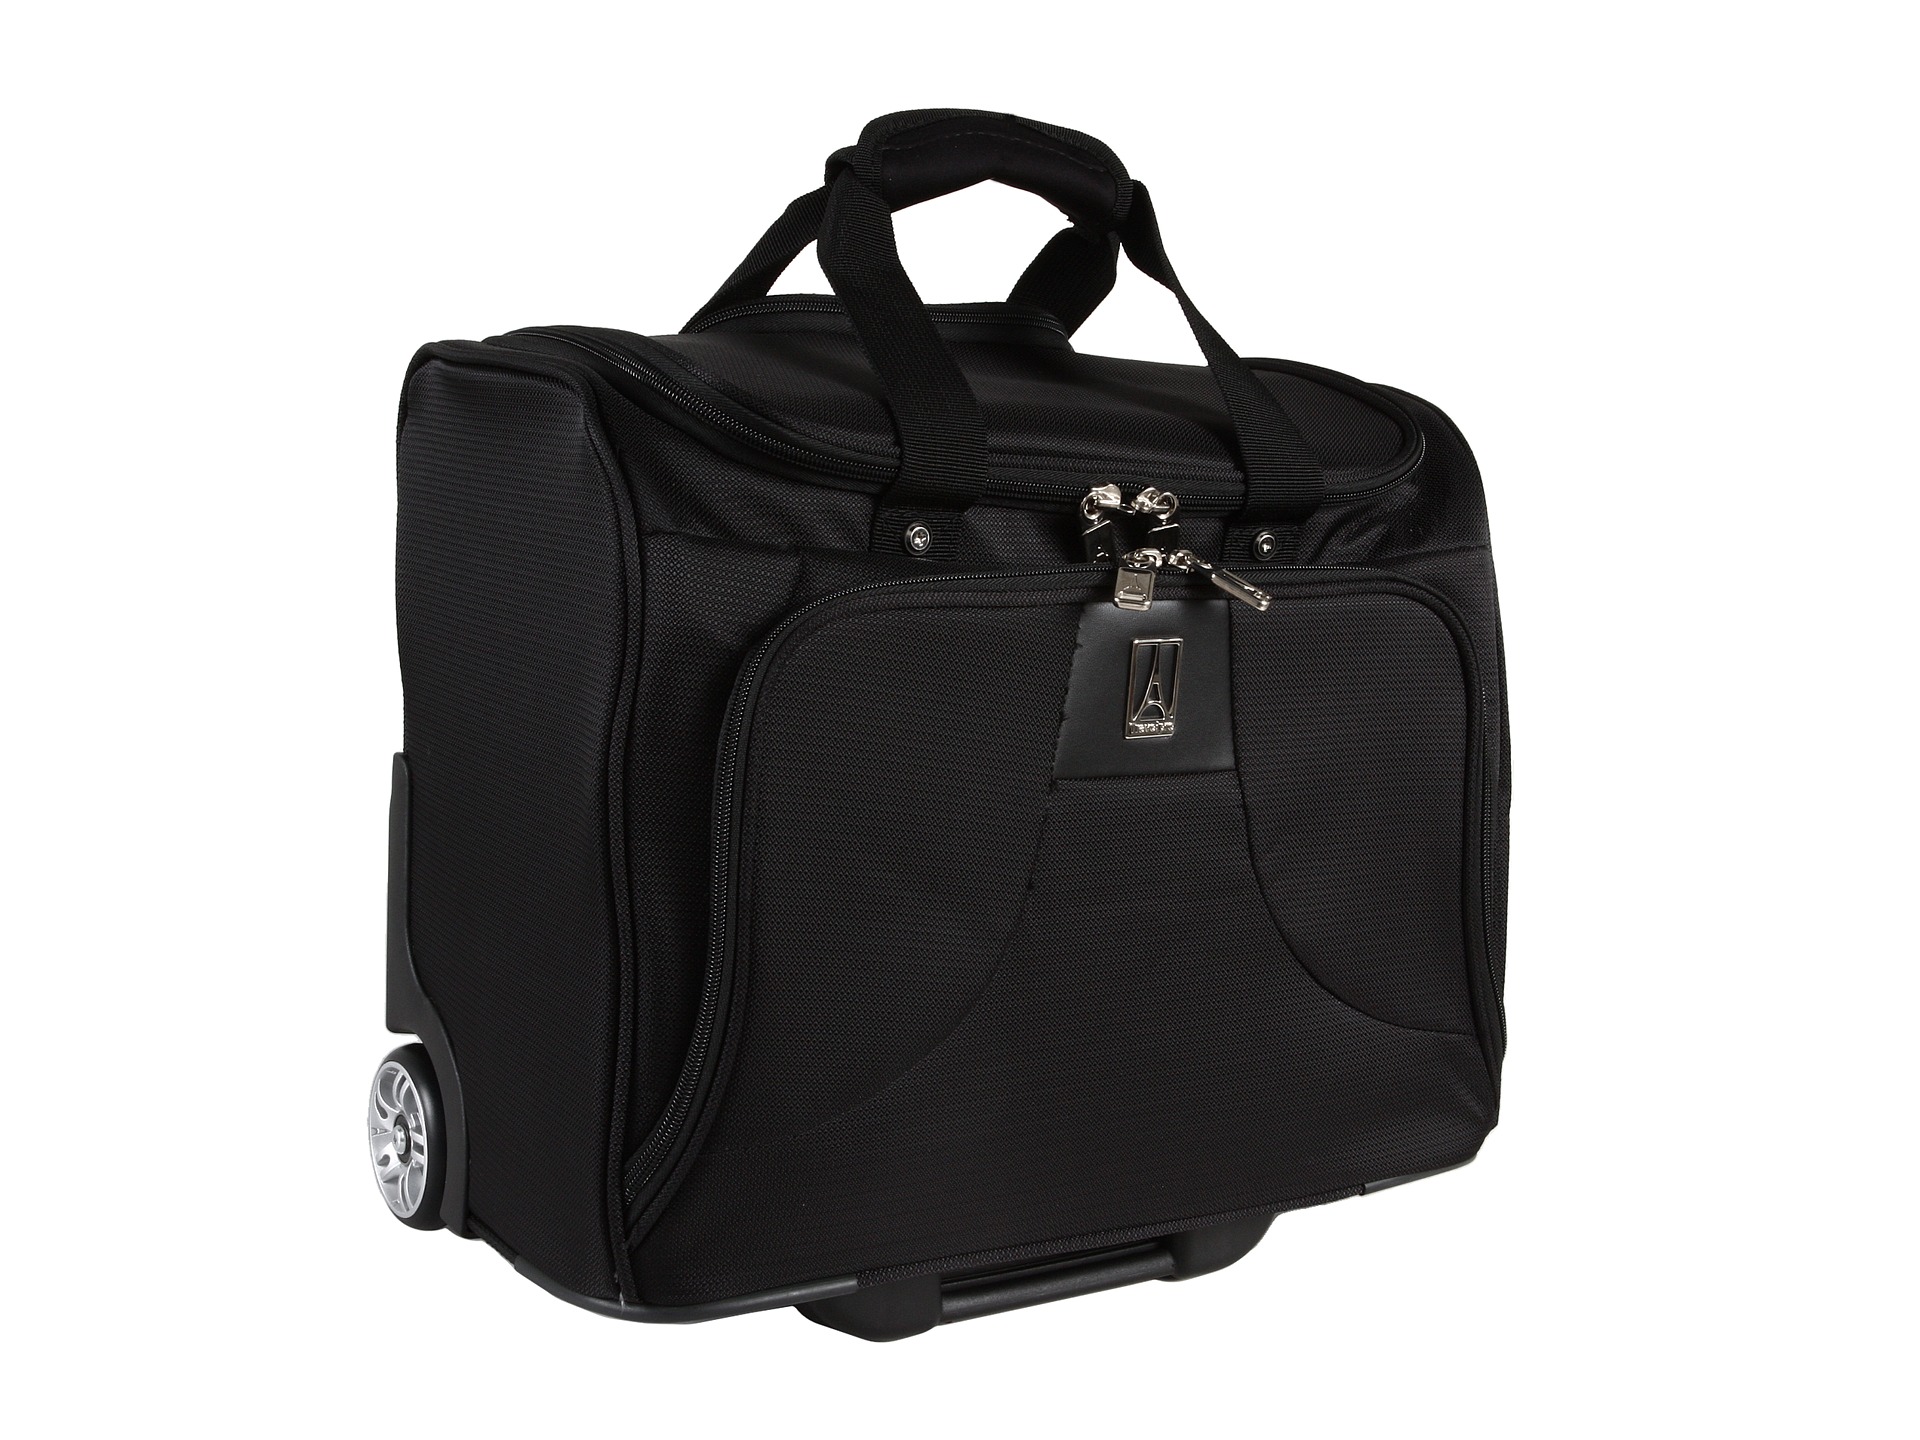 Travelpro Walkabout Lite 4 Rolling Computer Tote | Shipped Free at Zappos